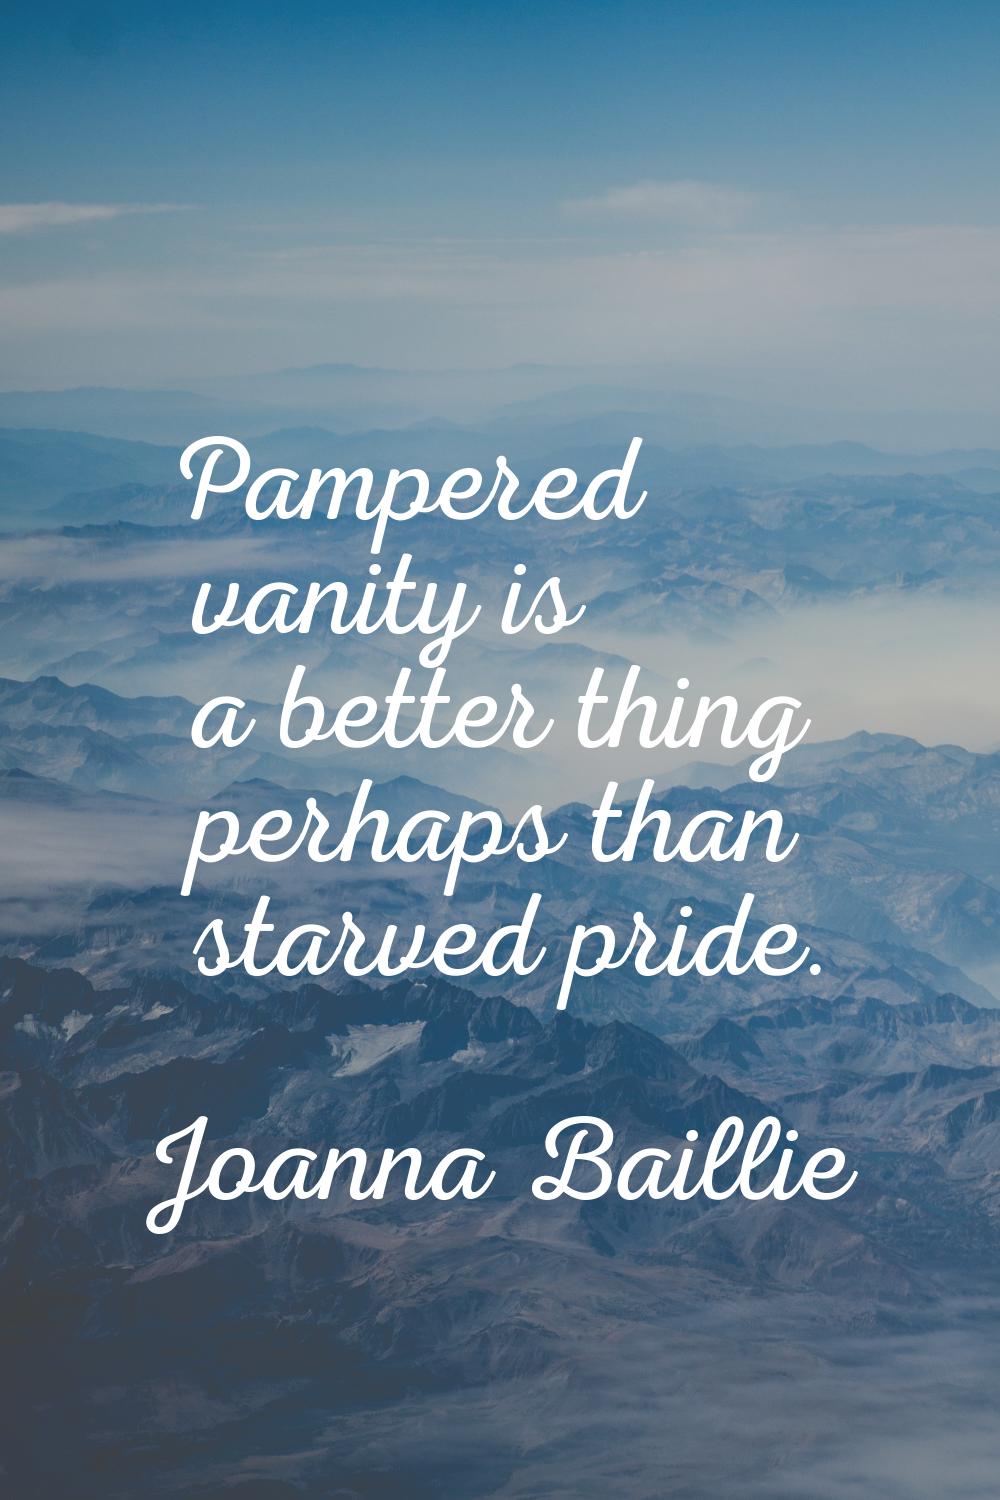 Pampered vanity is a better thing perhaps than starved pride.